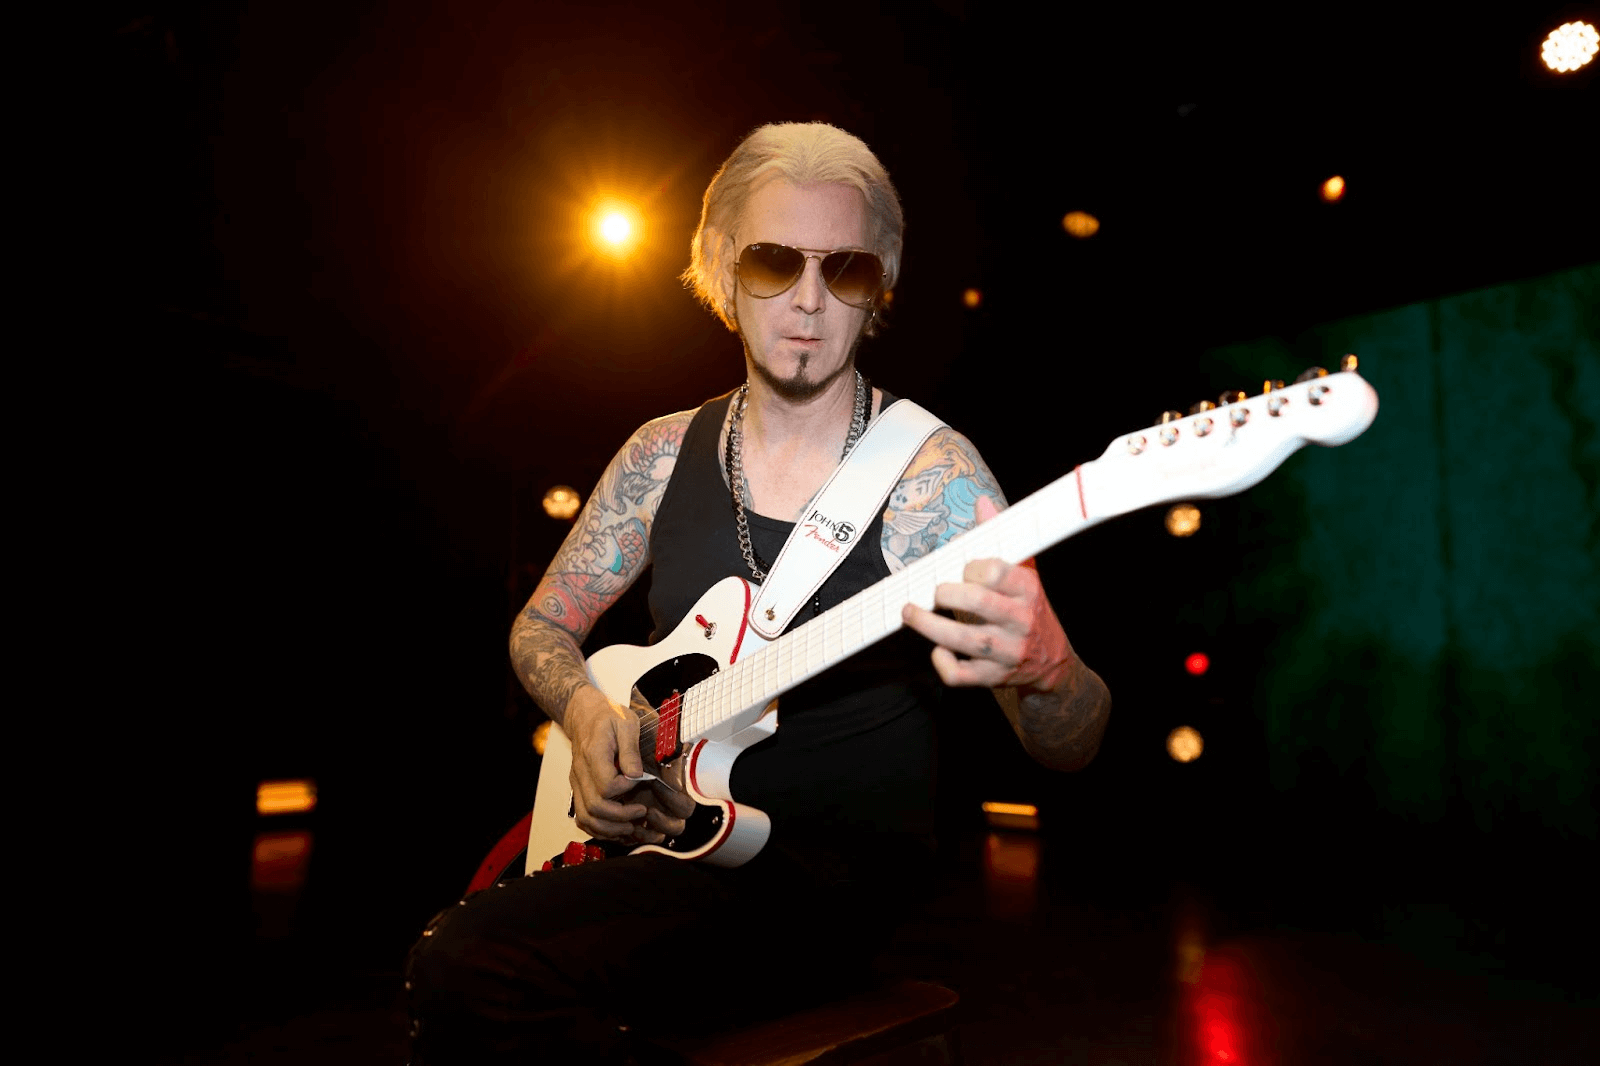 Fender Captures John 5’s Bold and Inventive Style With Limited…